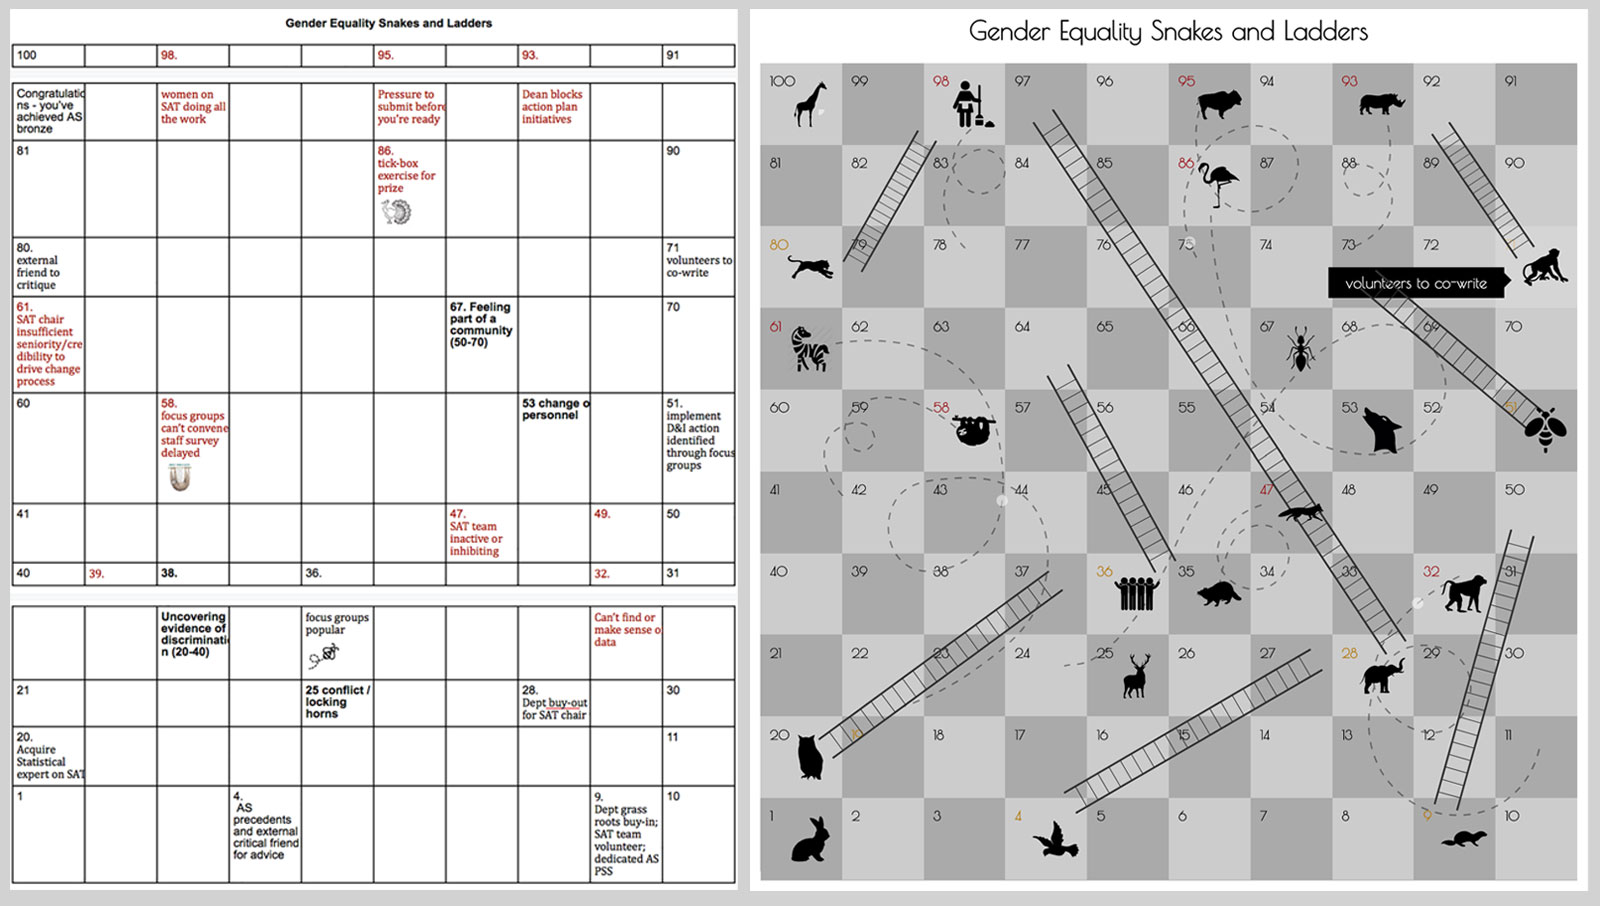 left: grid of 10 by 10 squares numbered 1 to 100, some with text inside, right: grid of 10 by 10 squares numbered 1 to 100, with alternating dark and light grey squares, animals silhouettes in some squares with ladders and dotted swirls scattered across the grid